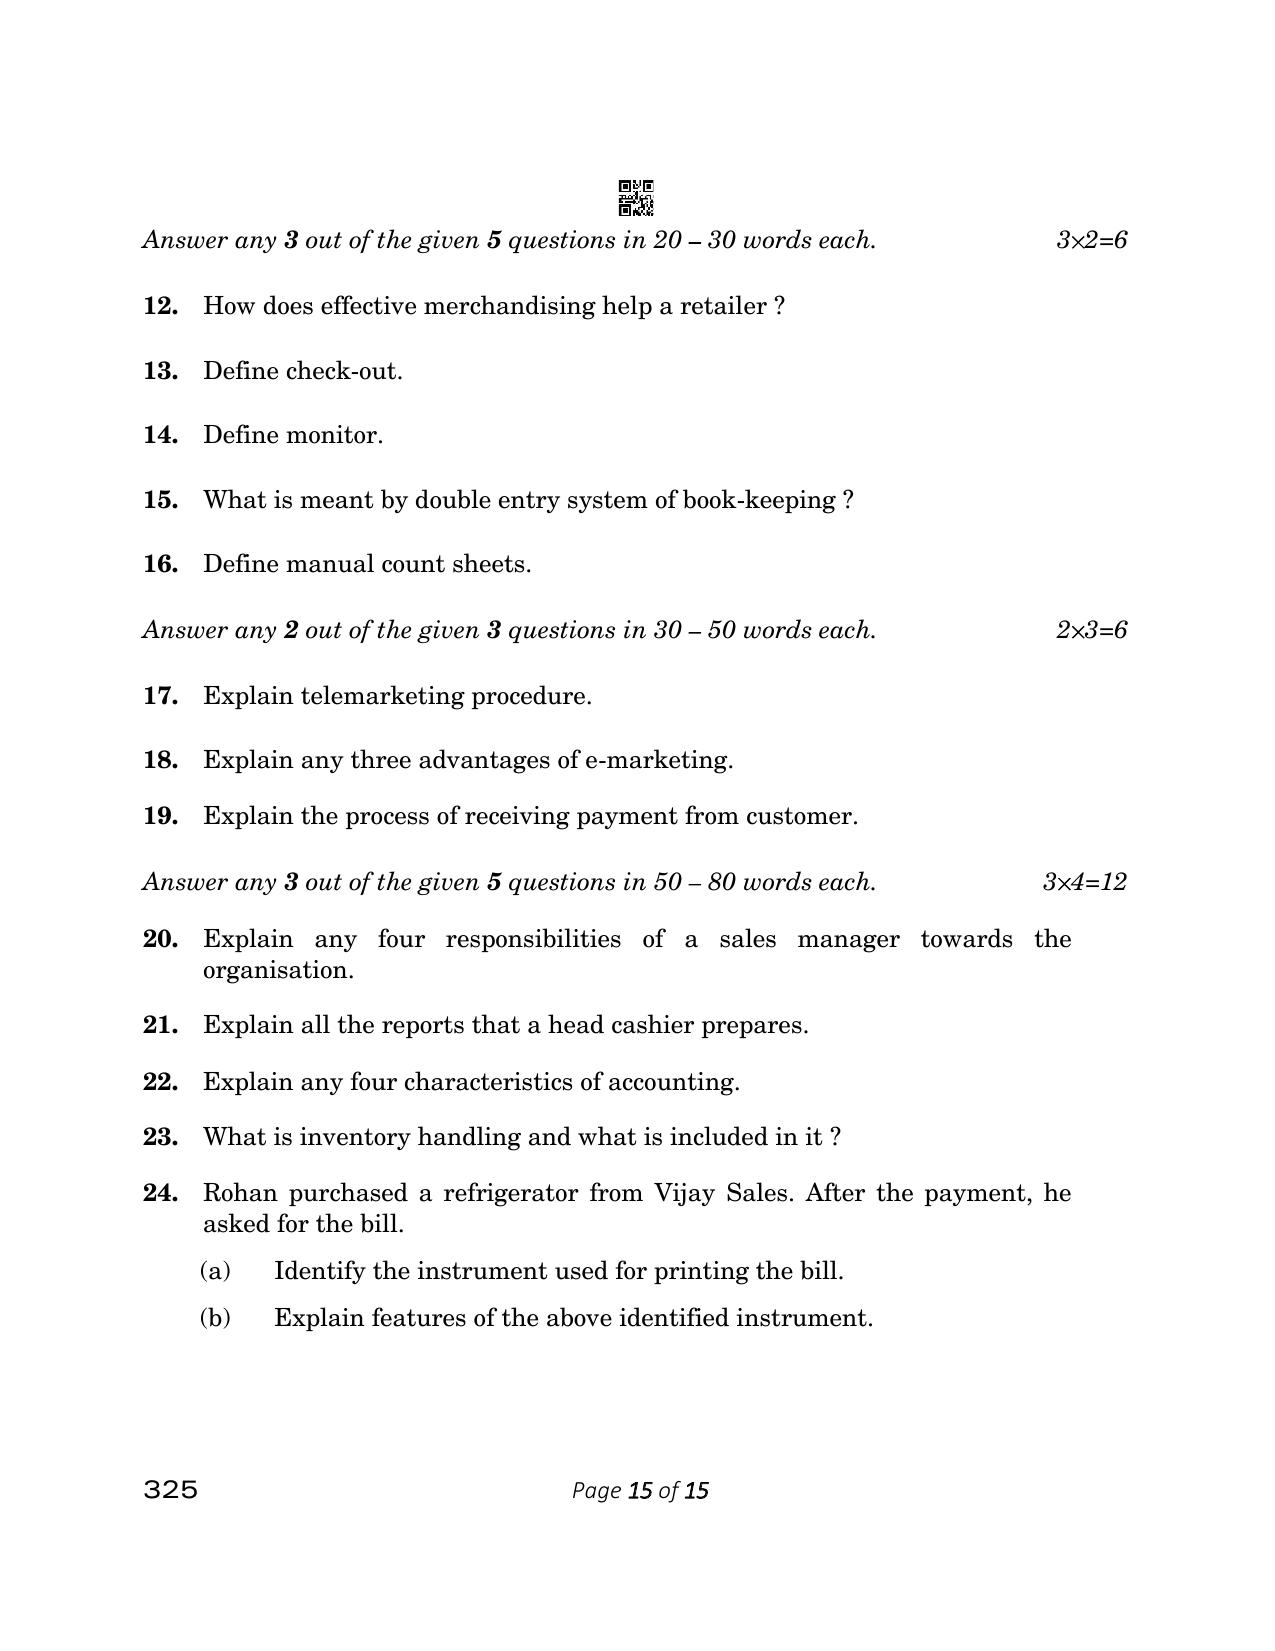 CBSE Class 12 325 Retail 2023 Question Paper - Page 15